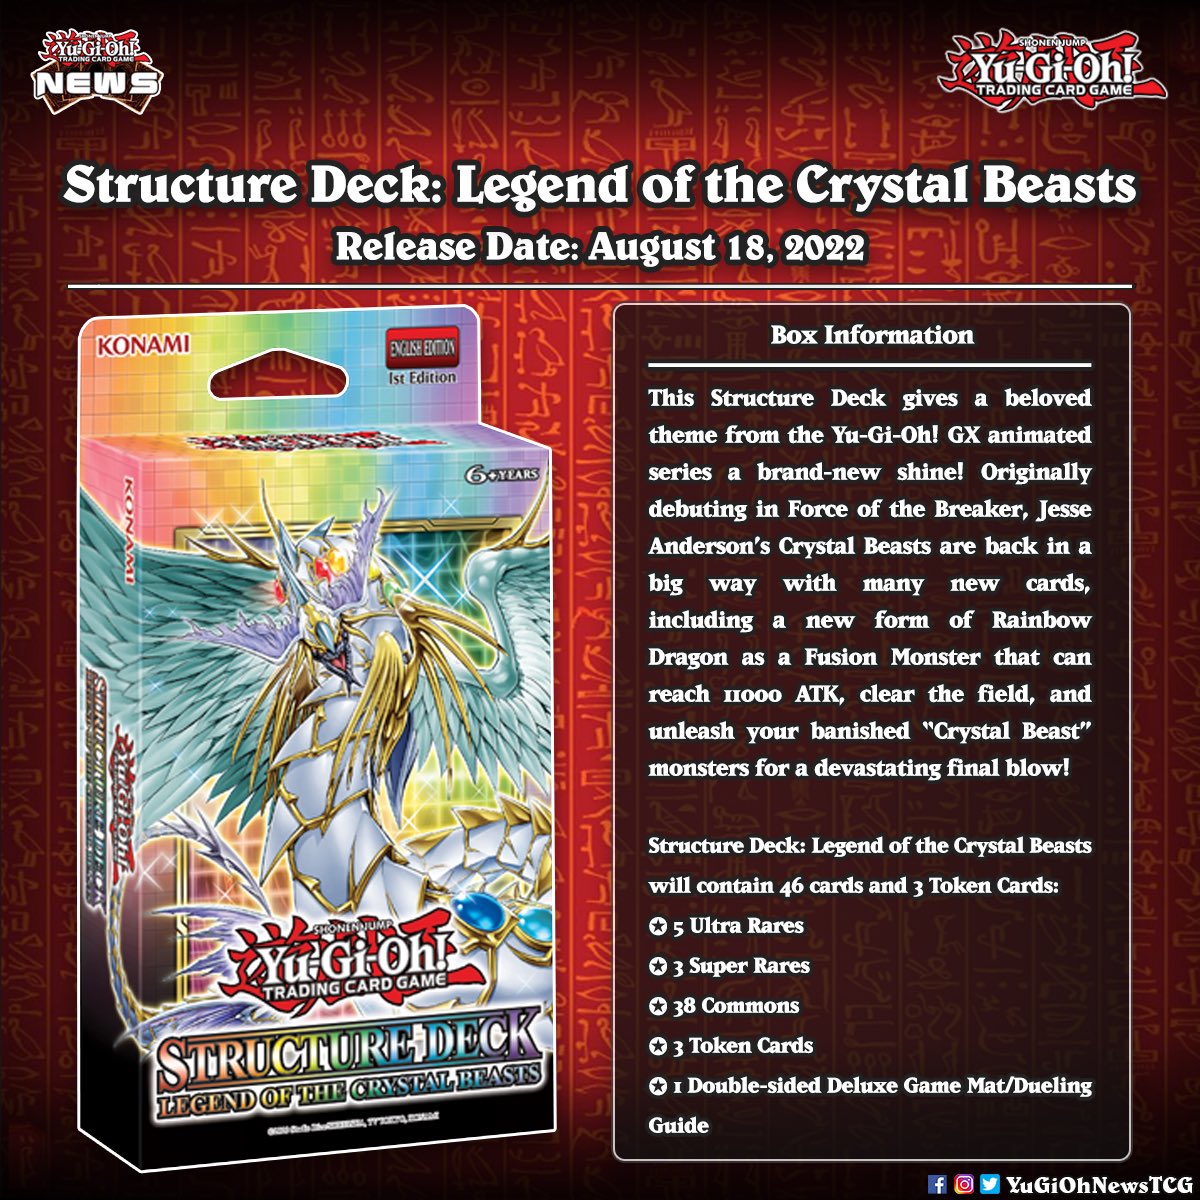 Yugioh News 𝗟𝗲𝗴𝗲𝗻𝗱 𝗼𝗳 𝘁𝗵𝗲 𝗖𝗿𝘆𝘀𝘁𝗮𝗹 𝗕𝗲𝗮𝘀𝘁𝘀 Rediscover The Power Of Family Bonds With Structure Deck Legend Of The Crystal Beasts 遊戯王 Yugioh 유희왕 T Co Tvu0okooln Twitter